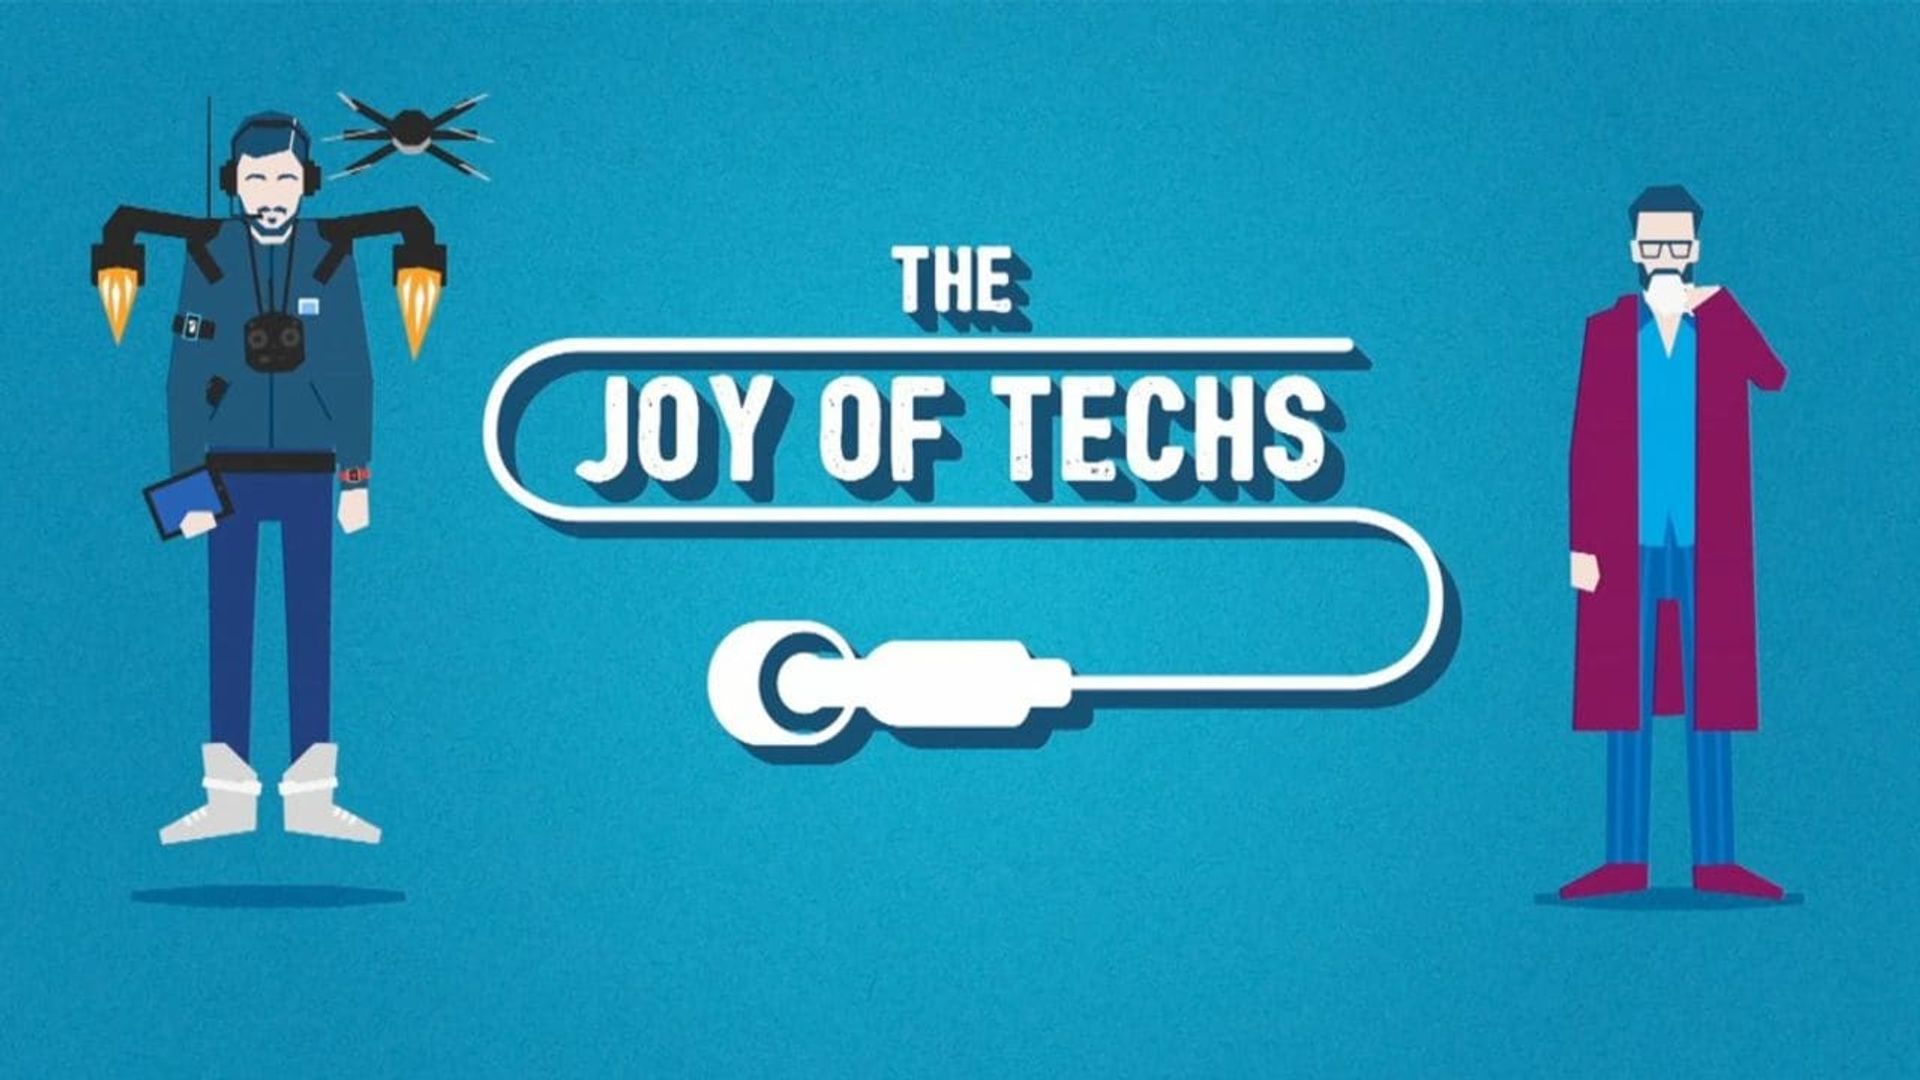 The Joy of Techs background